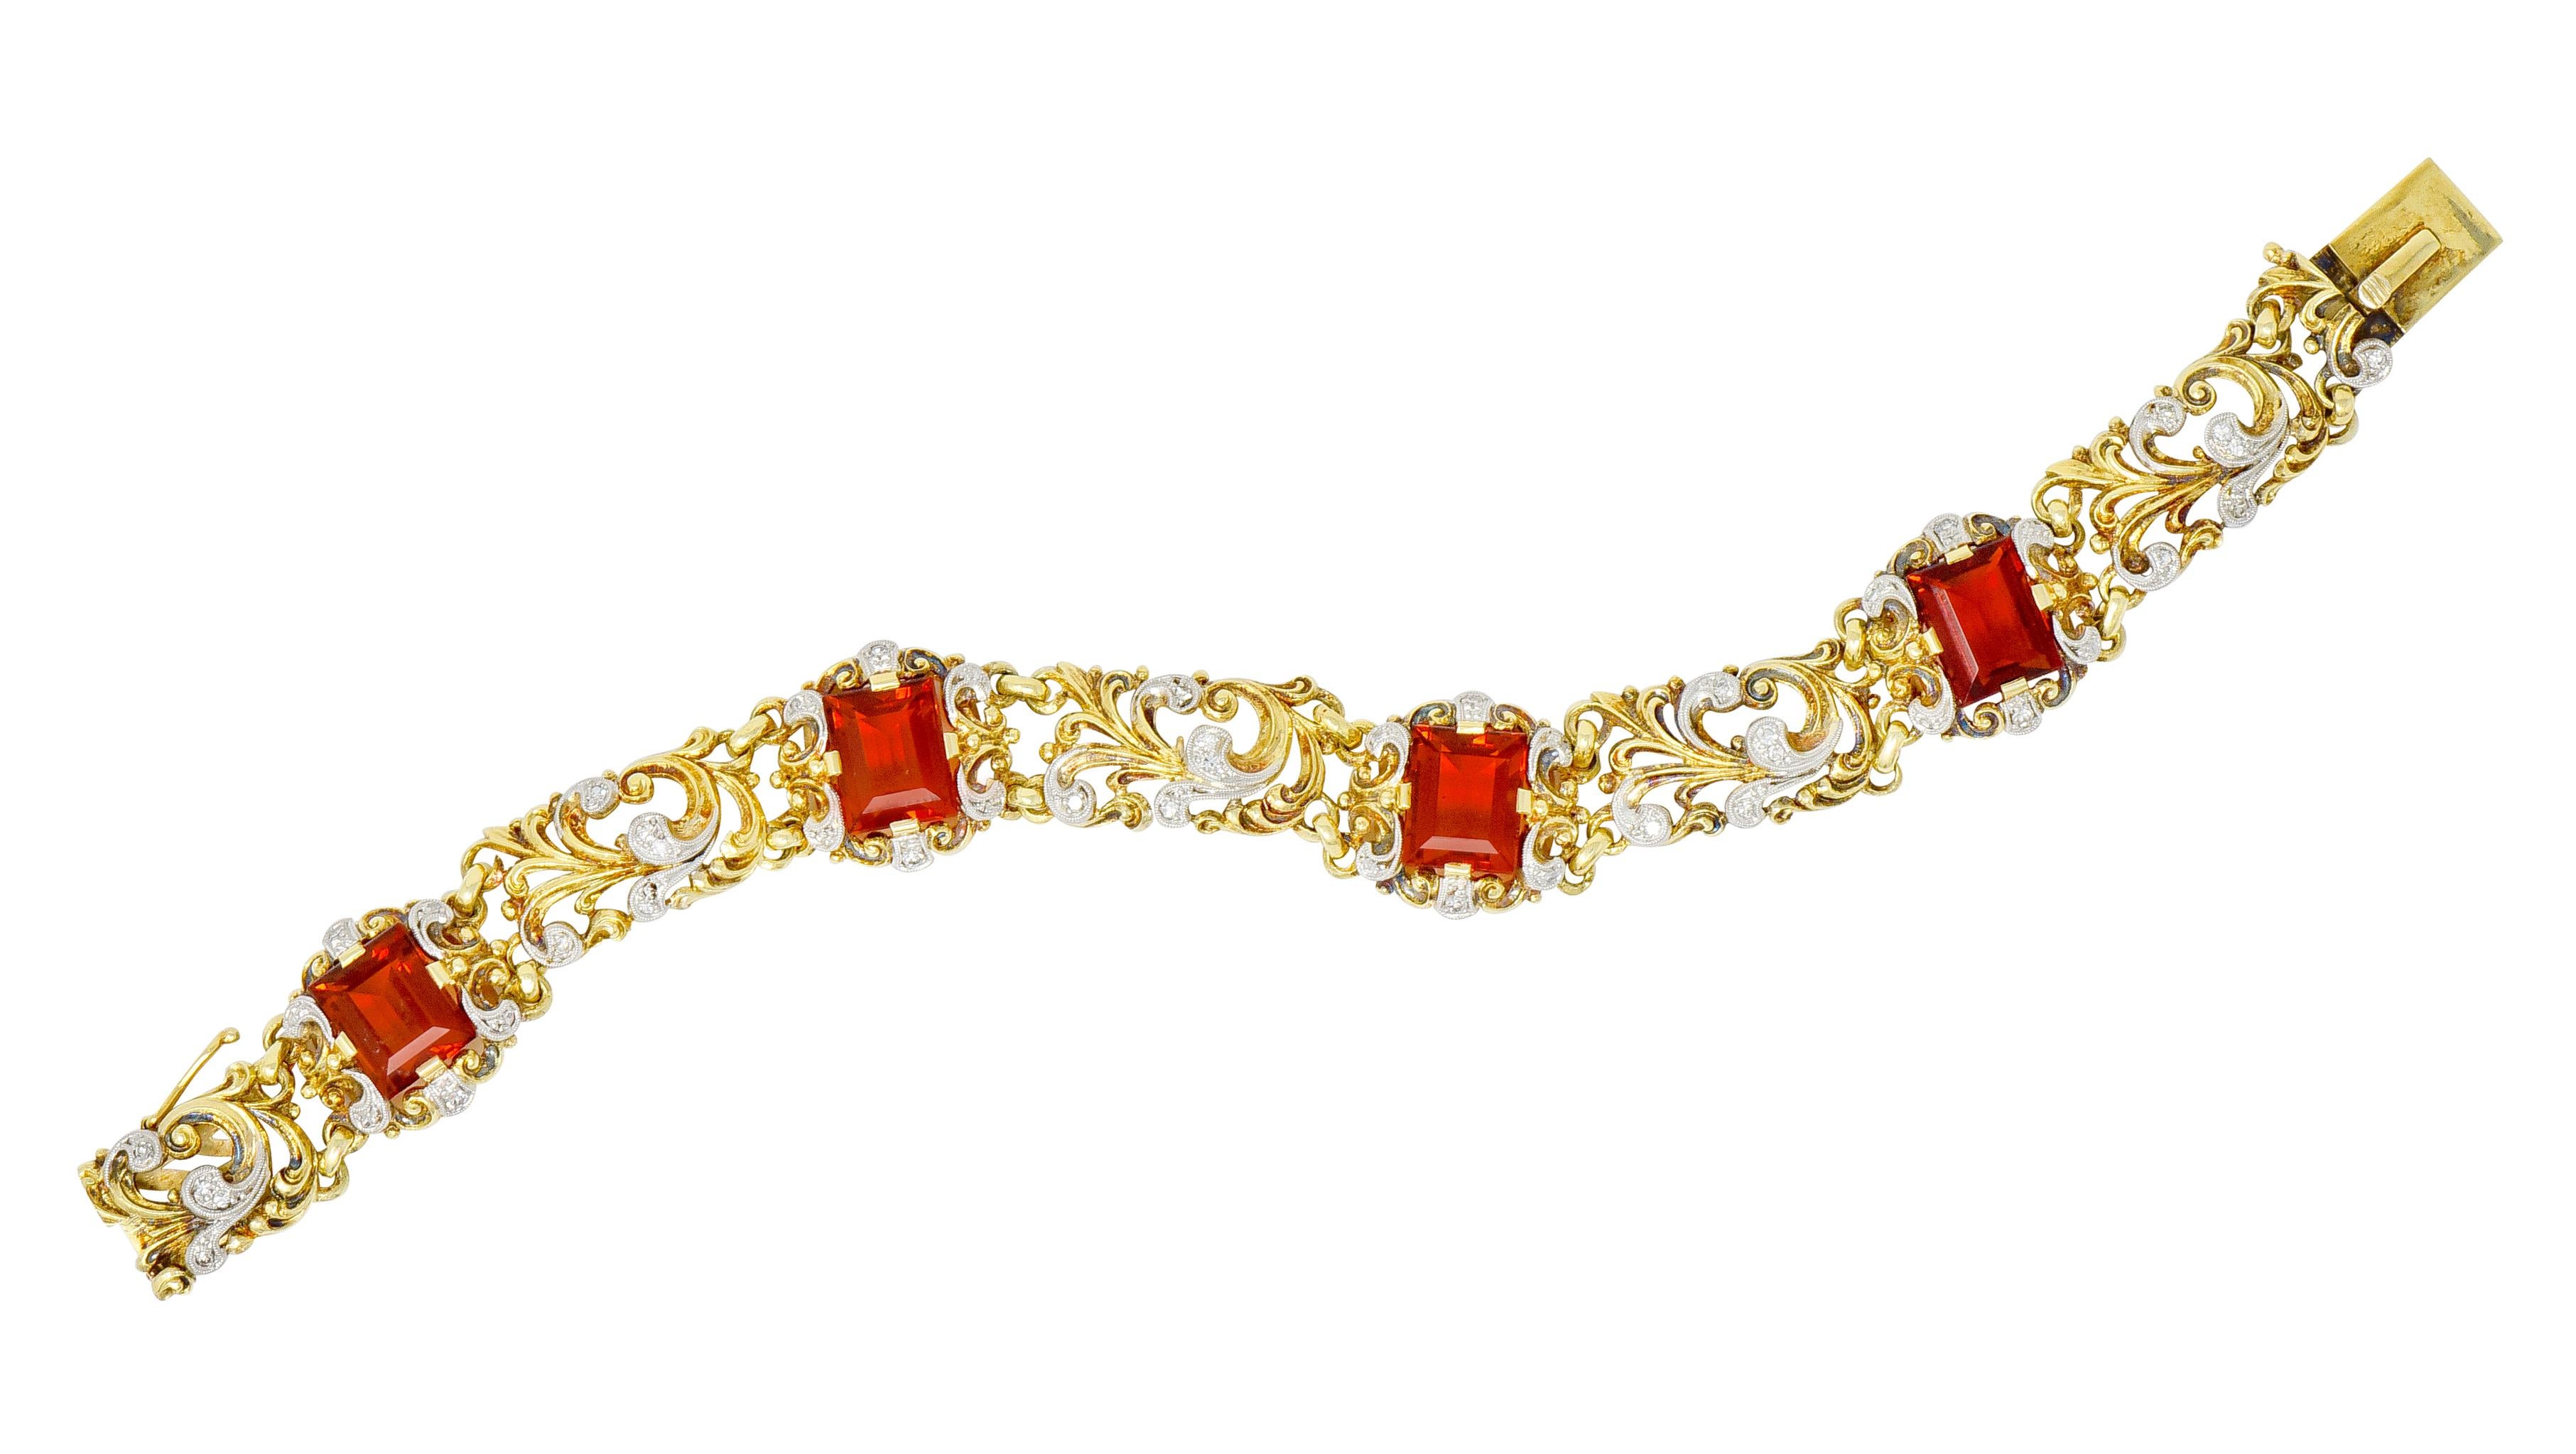 Link style bracelet featuring four emerald cut citrine weighing approximately 10.52 carats, very well-matched with a deep cognac orange color

Set by wide prongs in a pierced and scrolled mounting that alternates with similarly scrolled foliate